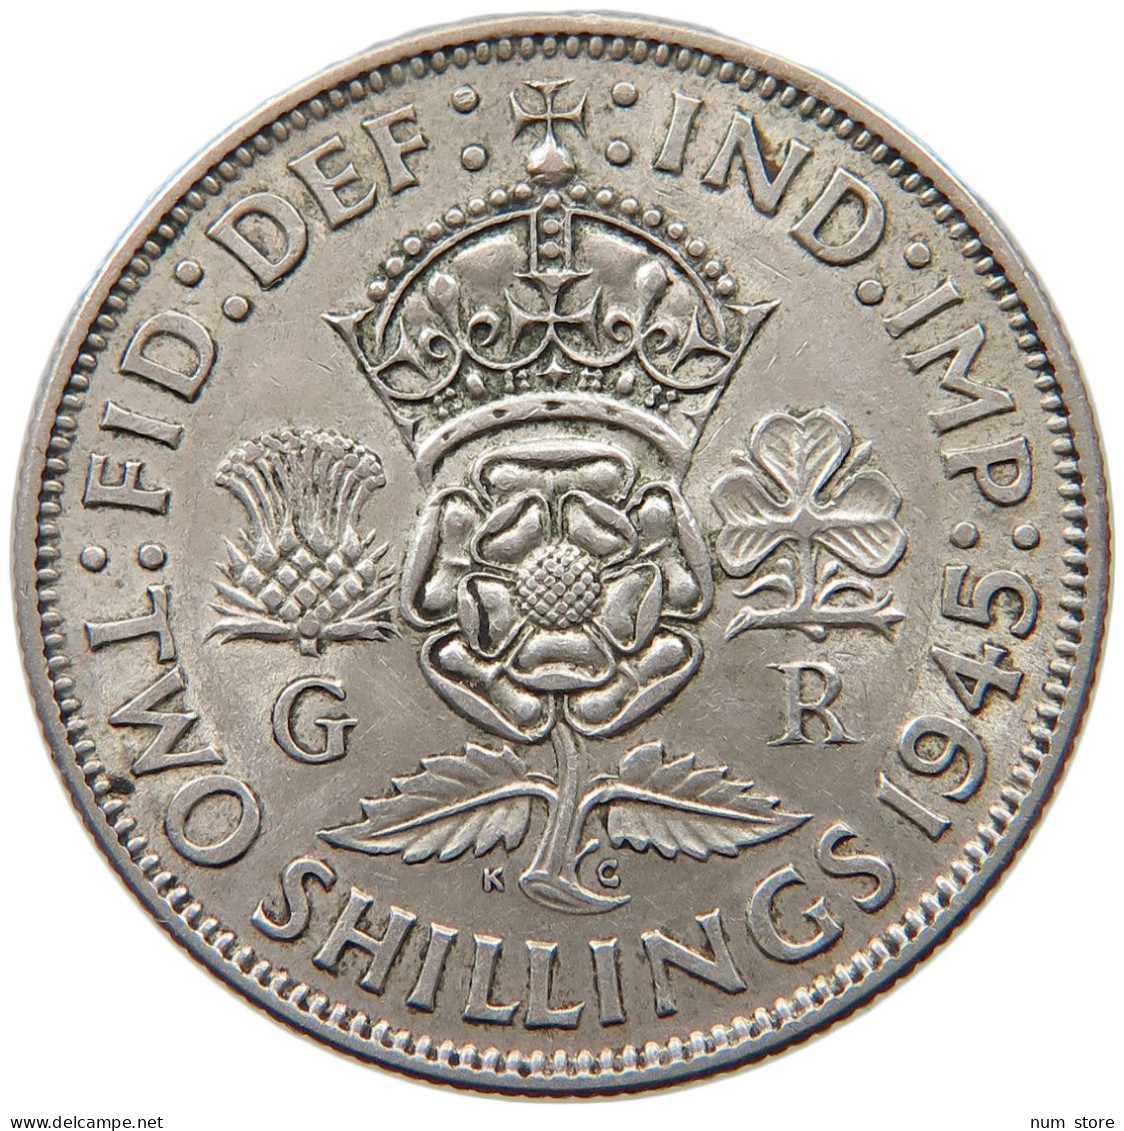 GREAT BRITAIN TWO SHILLINGS 1945 George VI. (1936-1952) #s035 0123 - J. 1 Florin / 2 Schillings